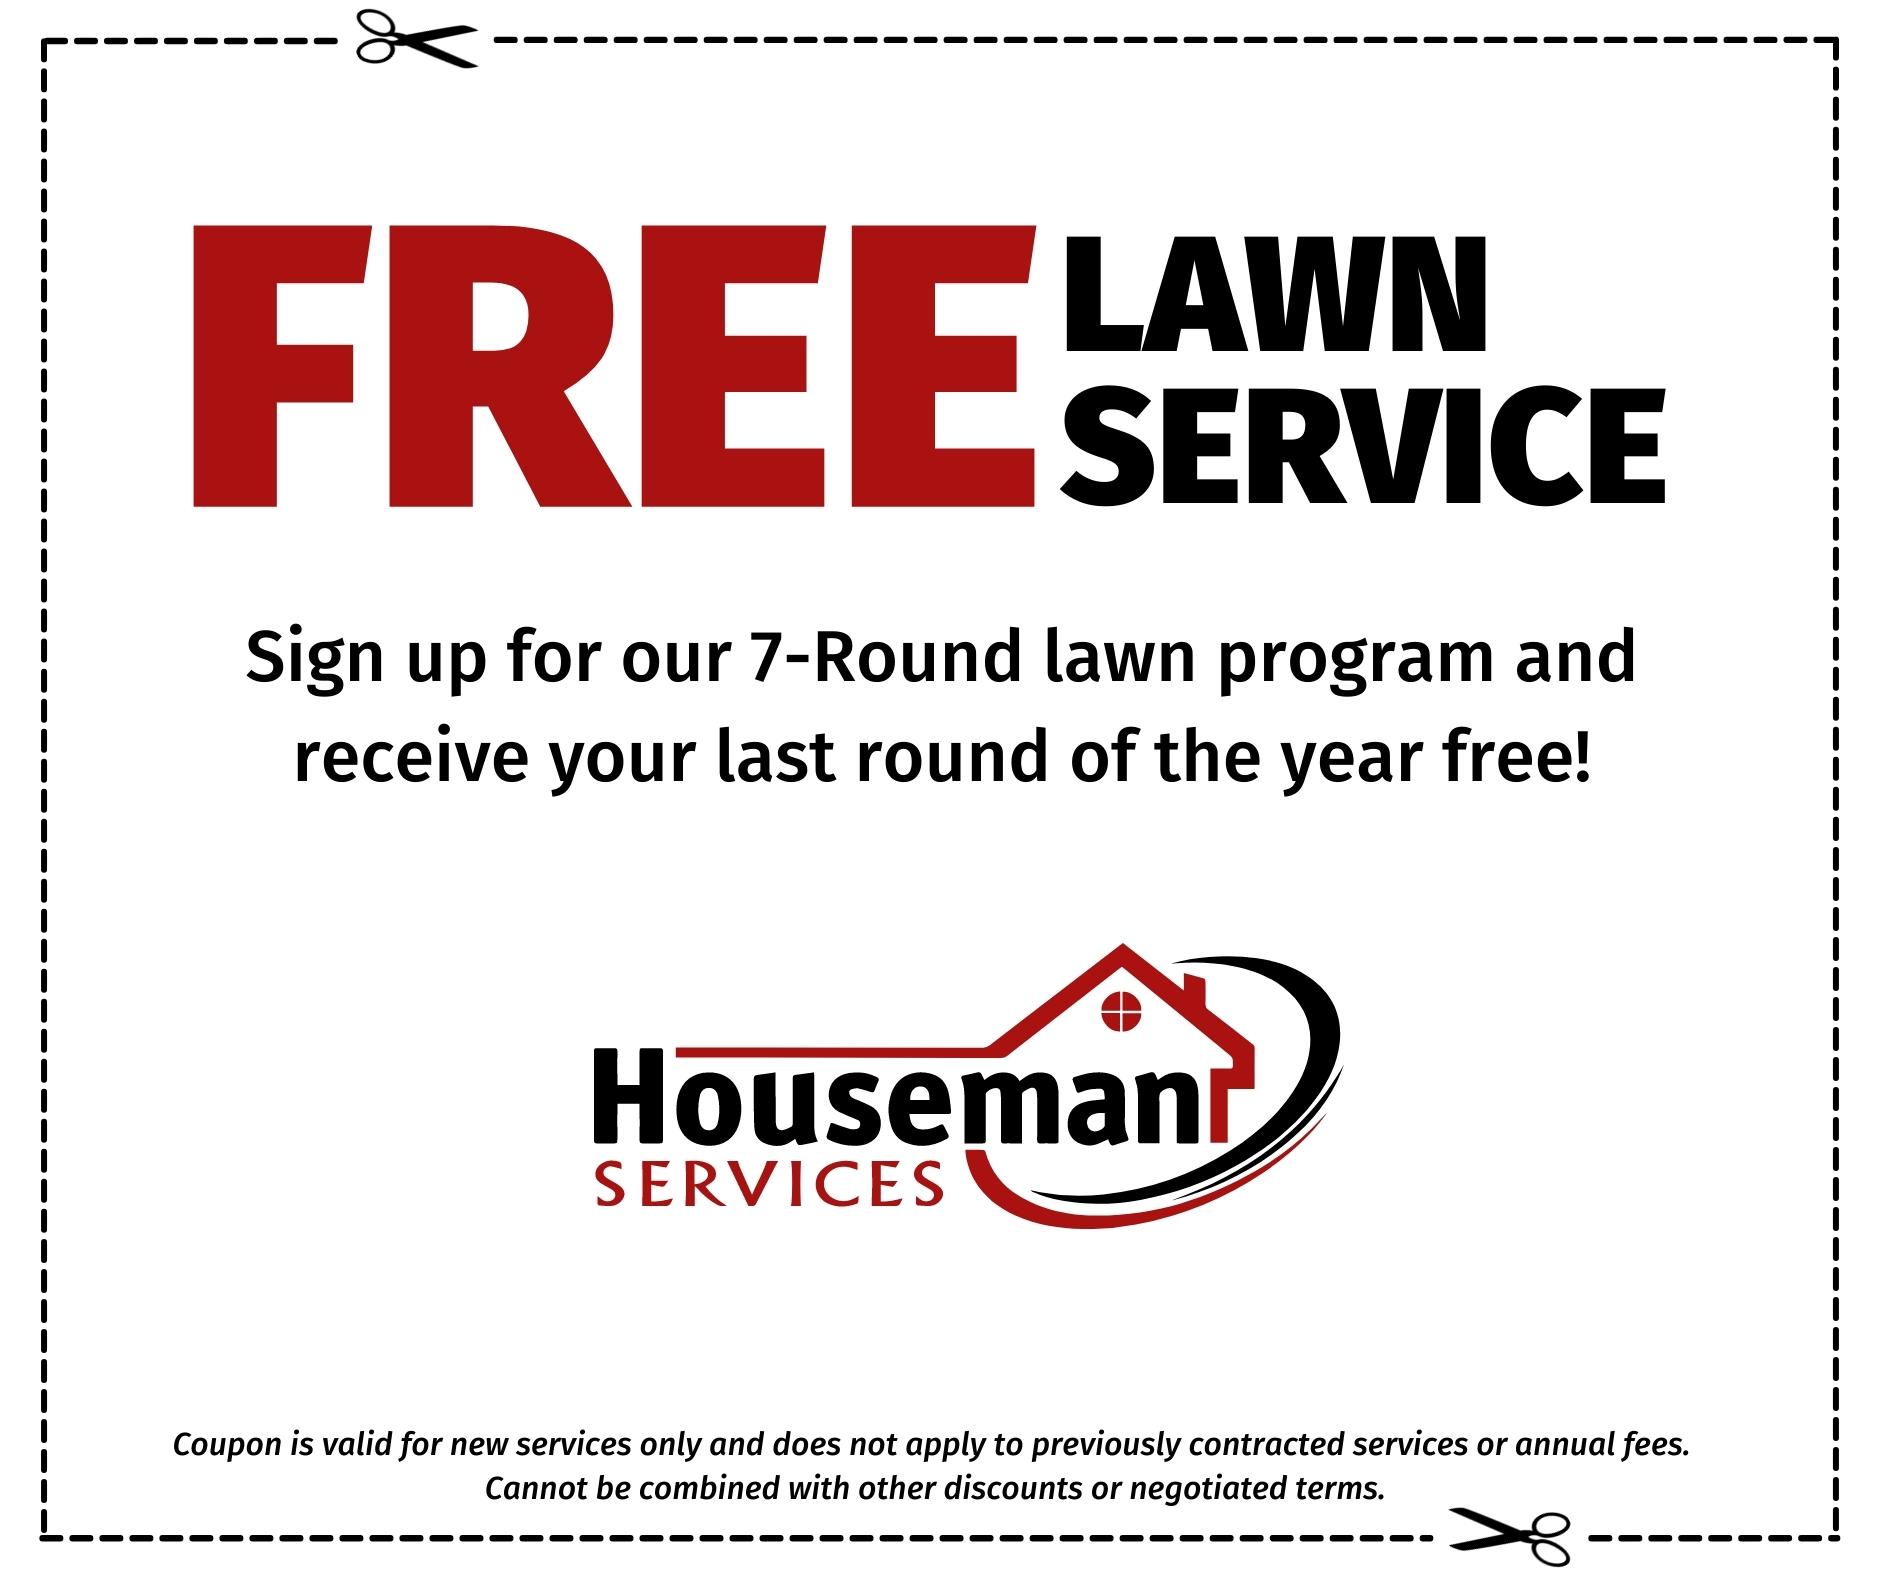 Get your last lawn care round free with purchase of 7 round lawn care program